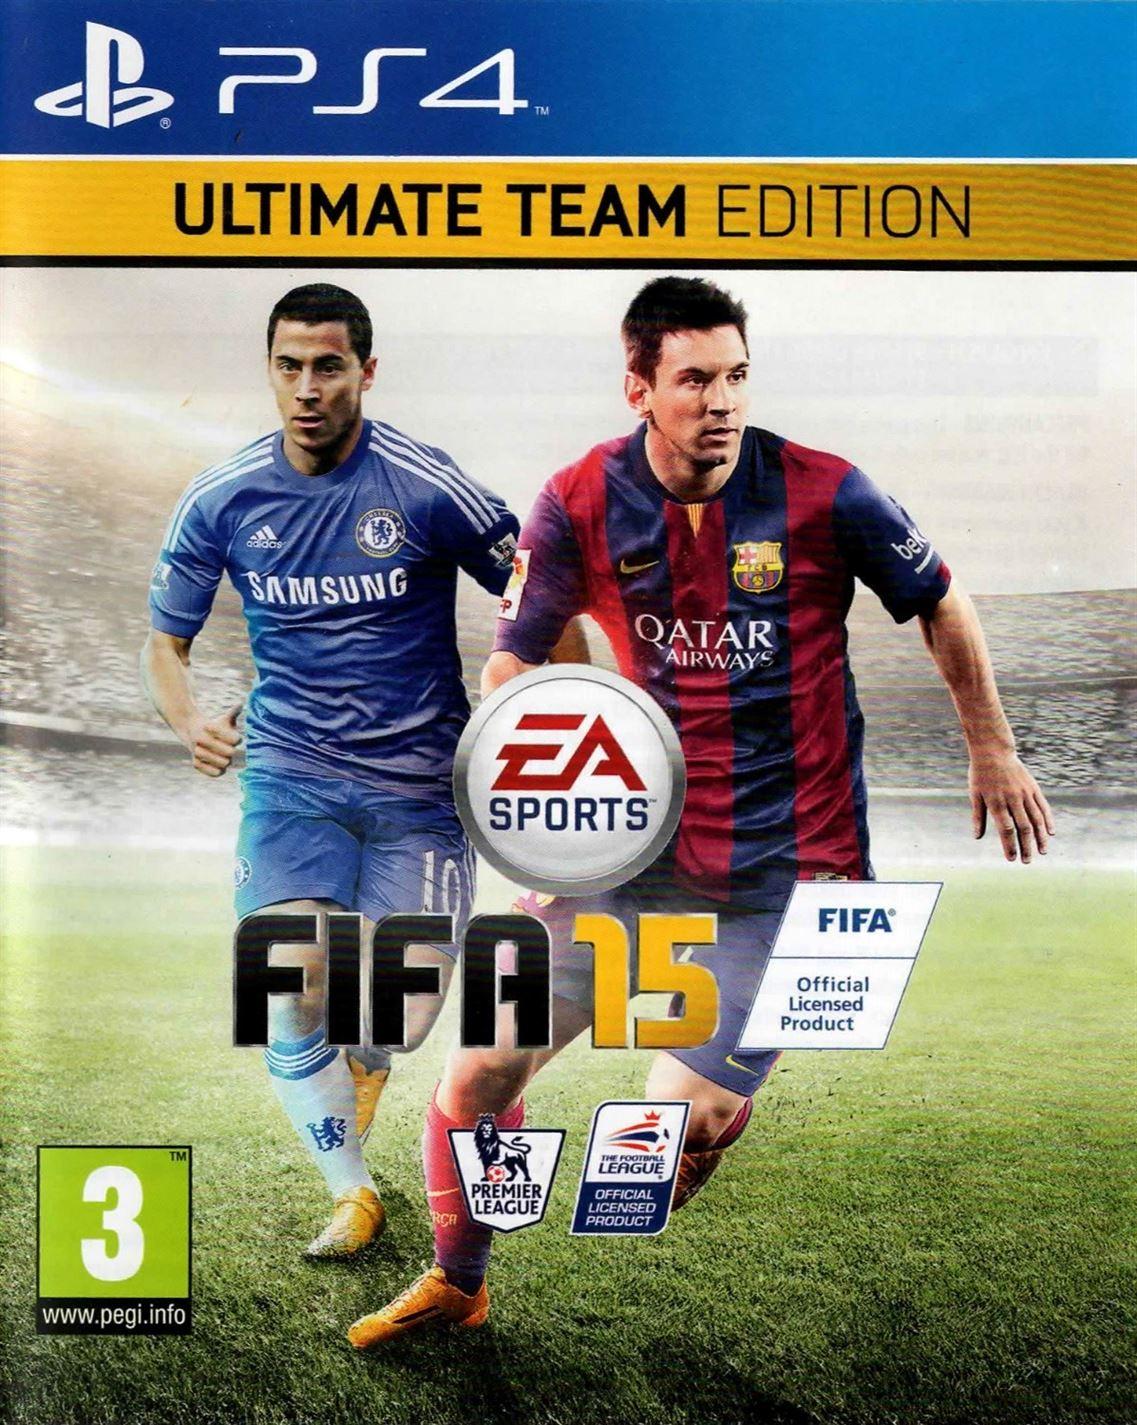 FIFA 15 Ultimate Team Edition PS4 (Playstation 4) - UK Seller NP